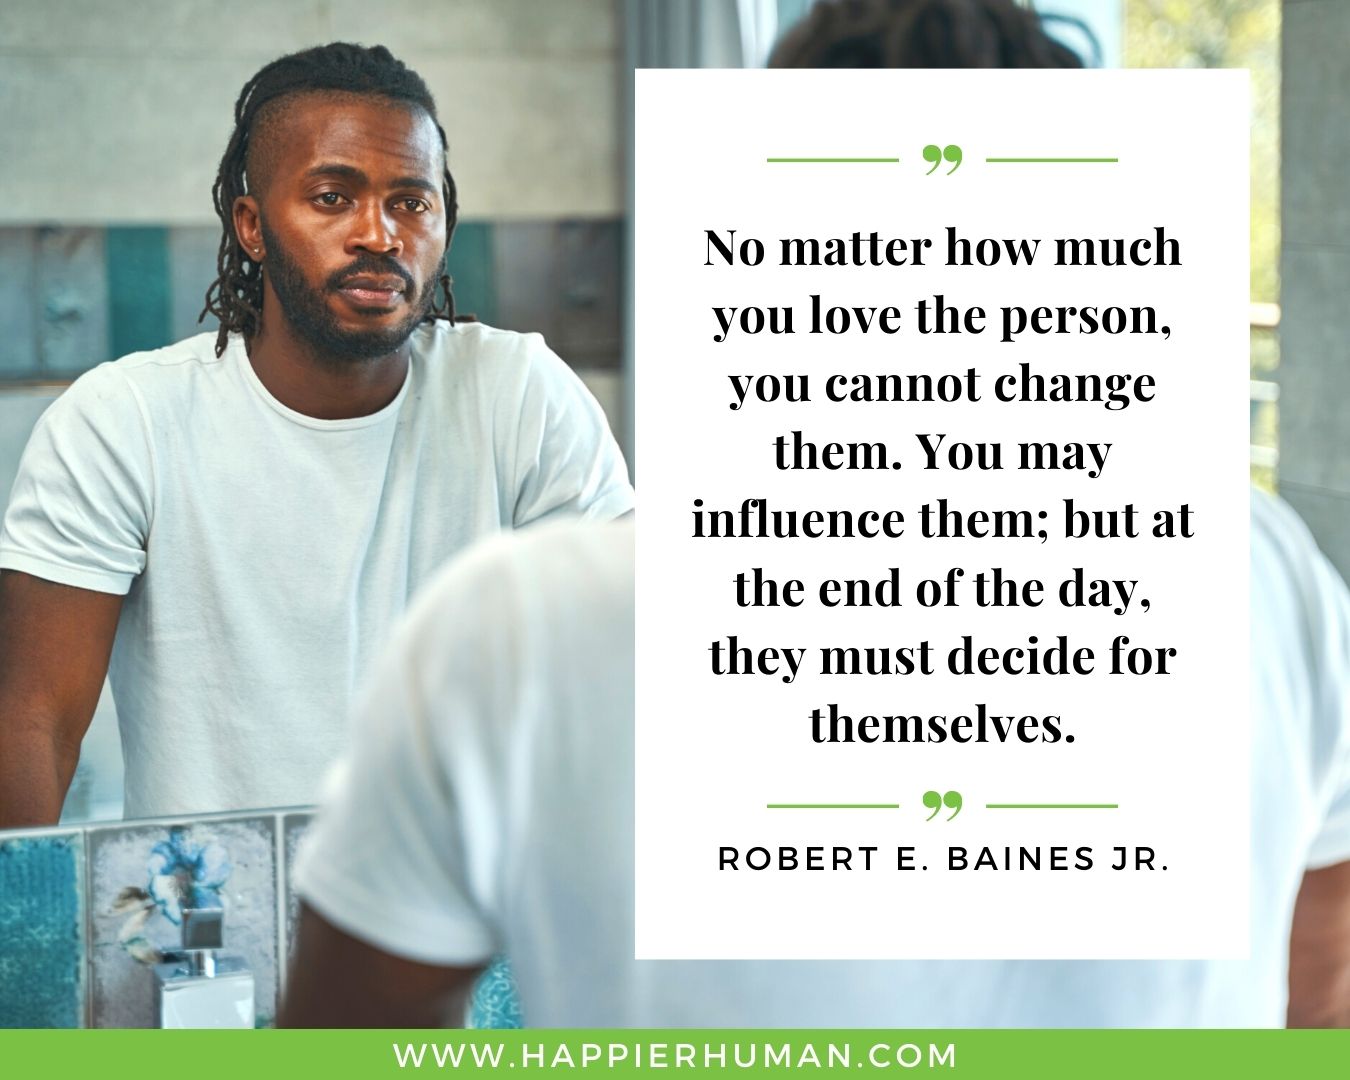 Toxic People Quotes - “No matter how much you love the person, you cannot change them. You may influence them; but at the end of the day, they must decide for themselves.” – Robert E. Baines Jr.